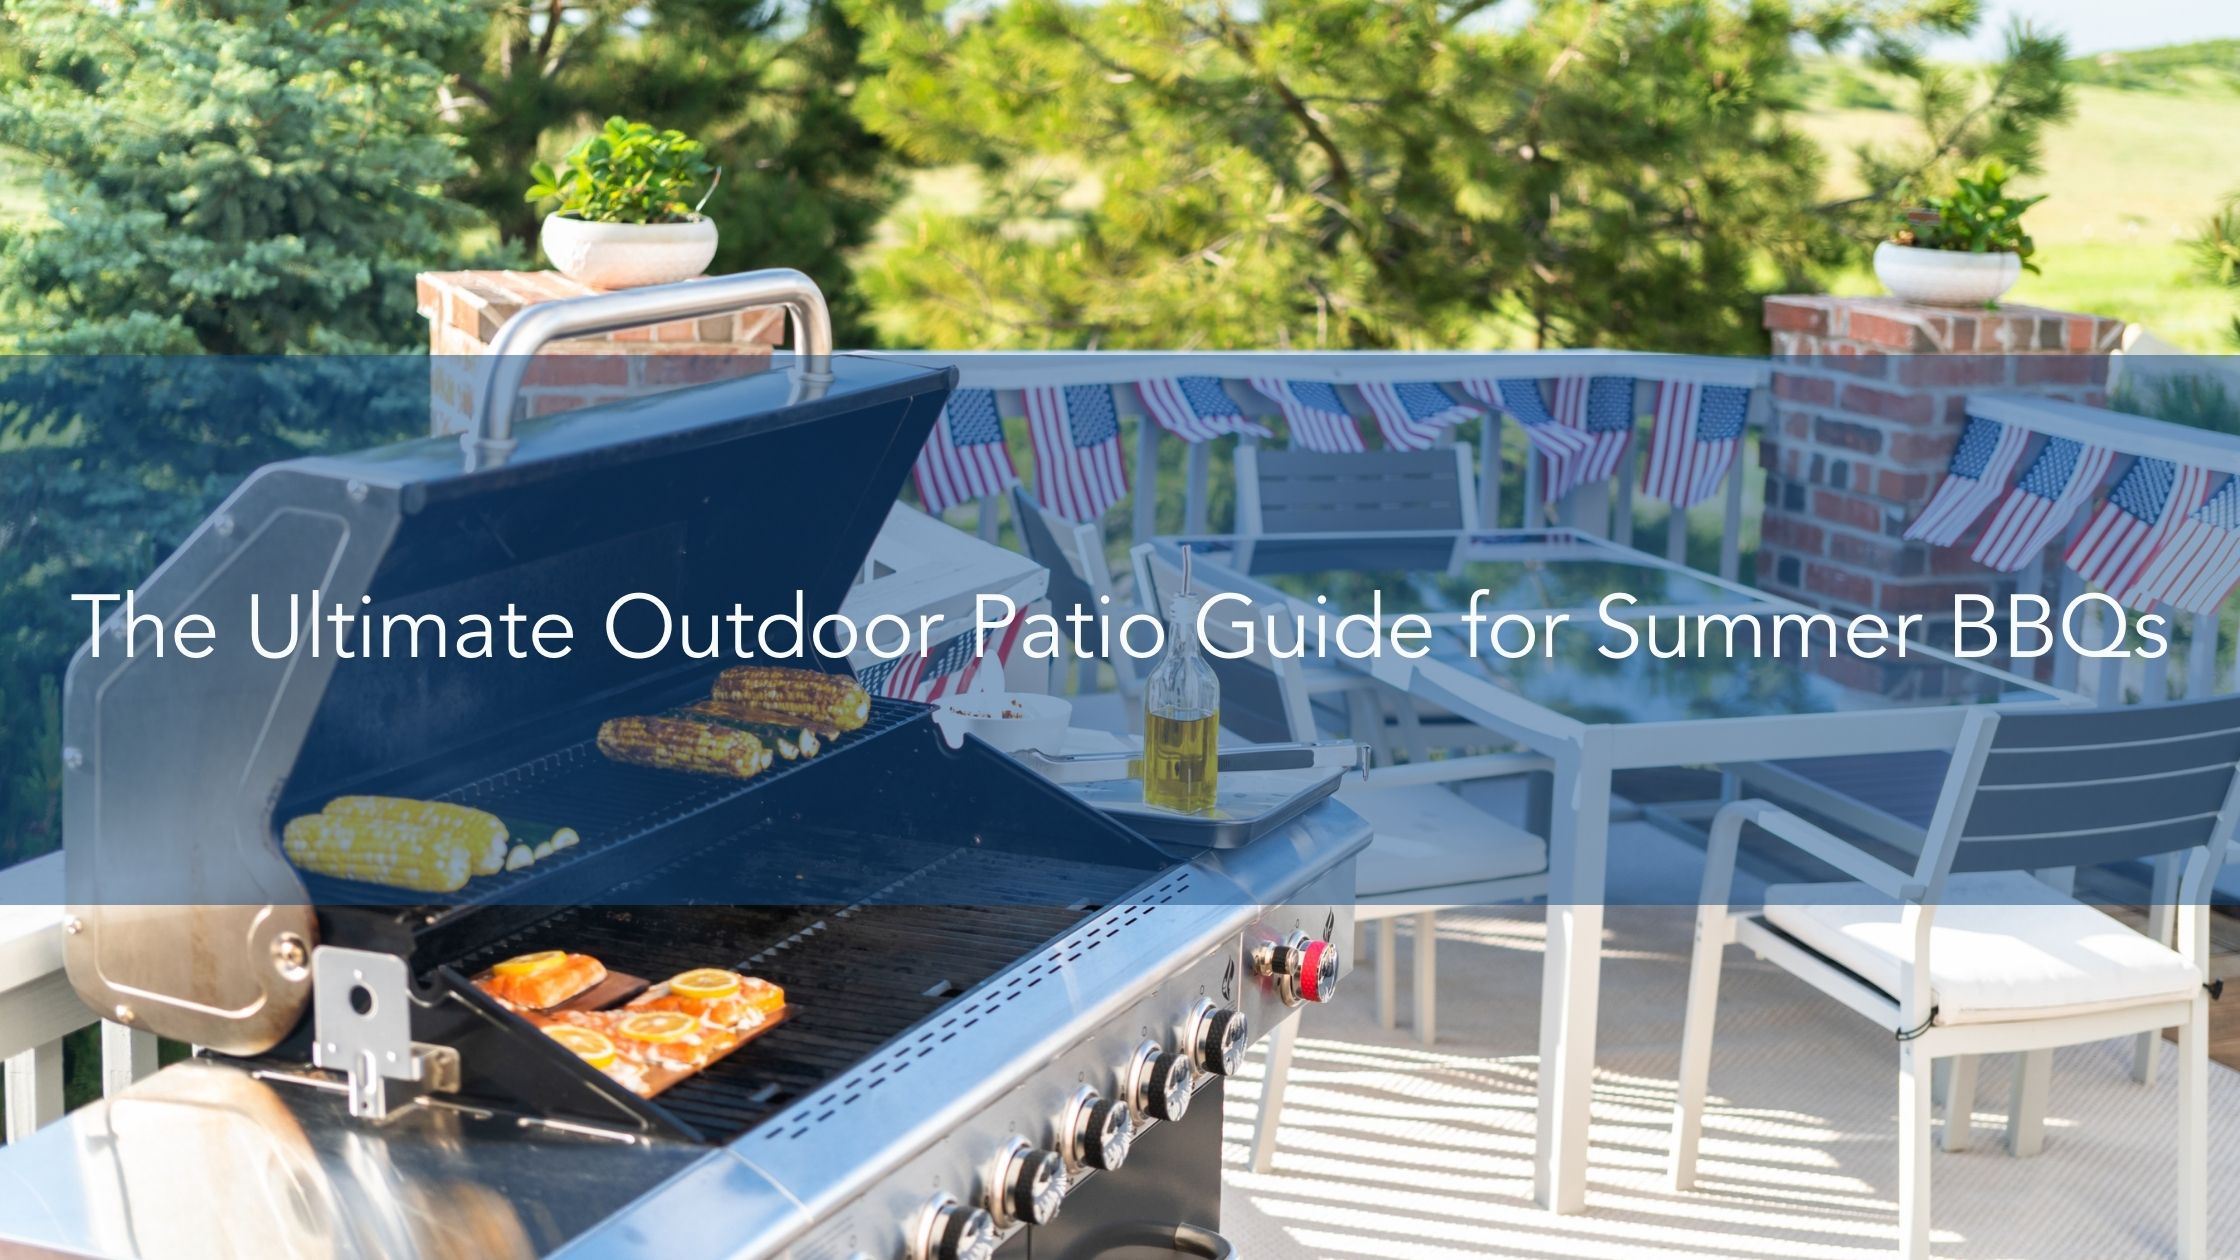 https://雷竞技下载链接官网appwww.explorizers.com/wp-content/uploads/2022/07/The-Ultimate-Outdoor-Patio-Guide-for-Summer-BBQs.jpg